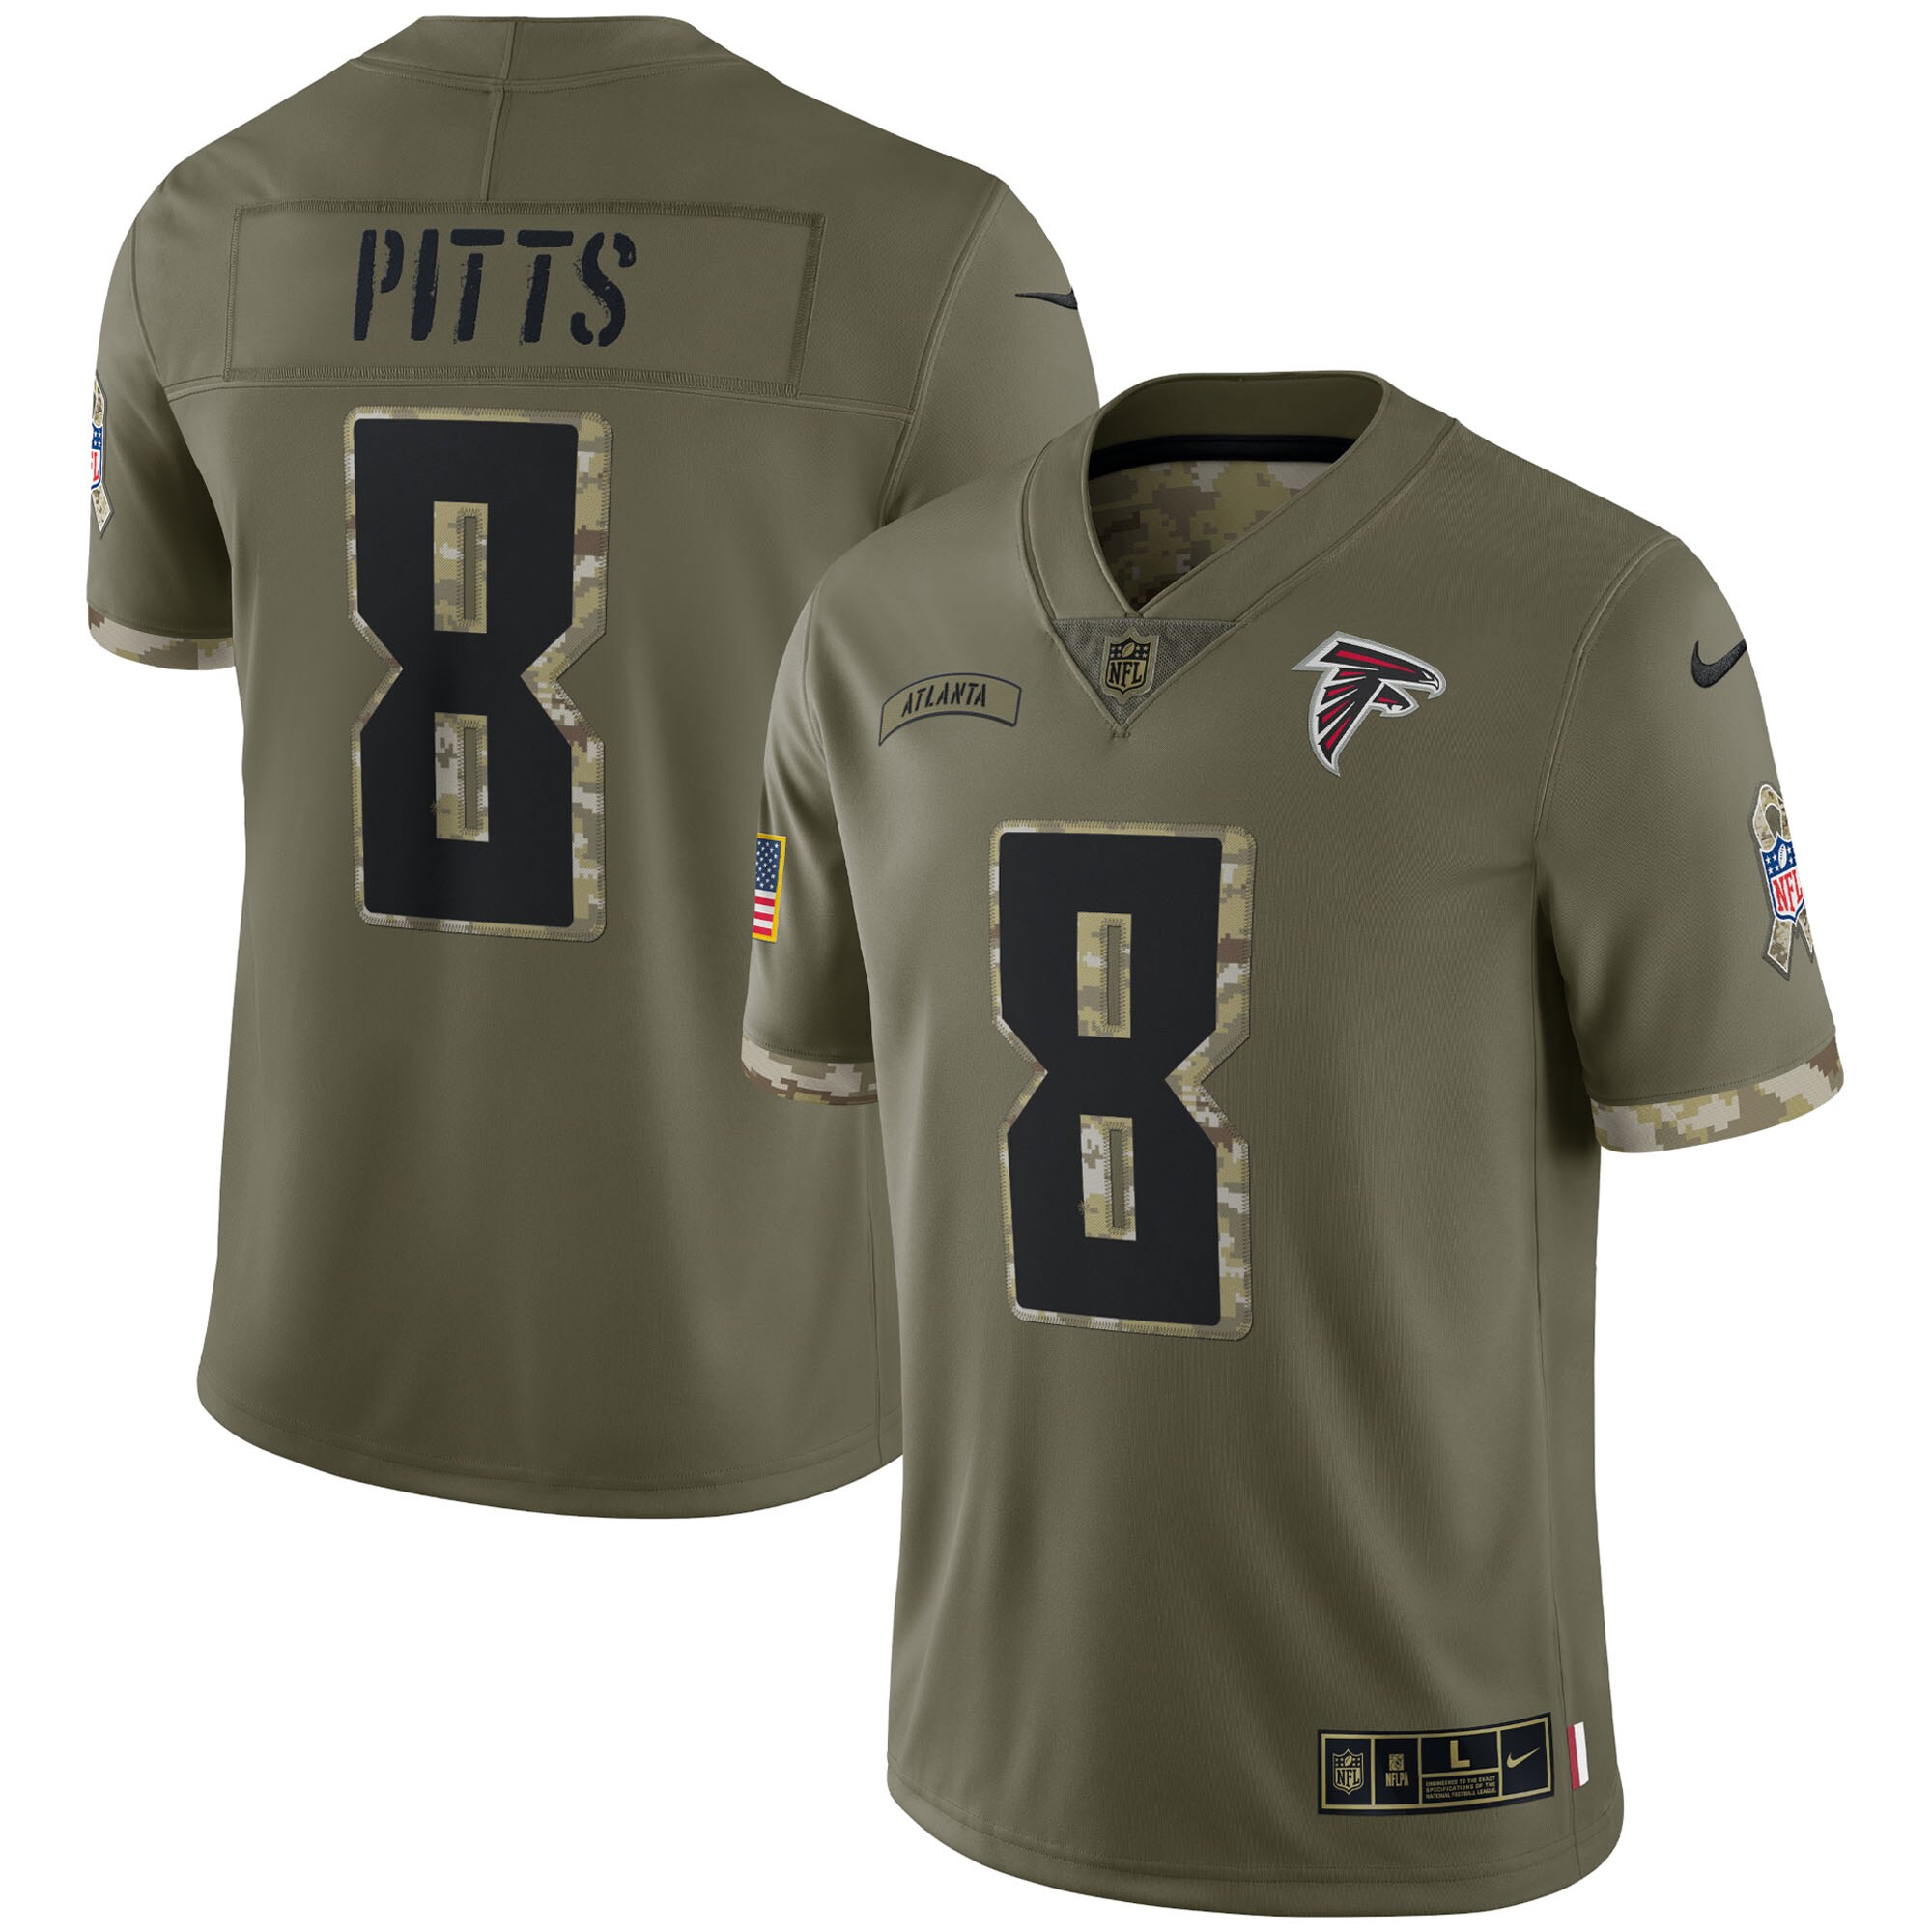 Men's Atlanta Falcons Nike Olive 2022 Salute To Service Limited Jersey